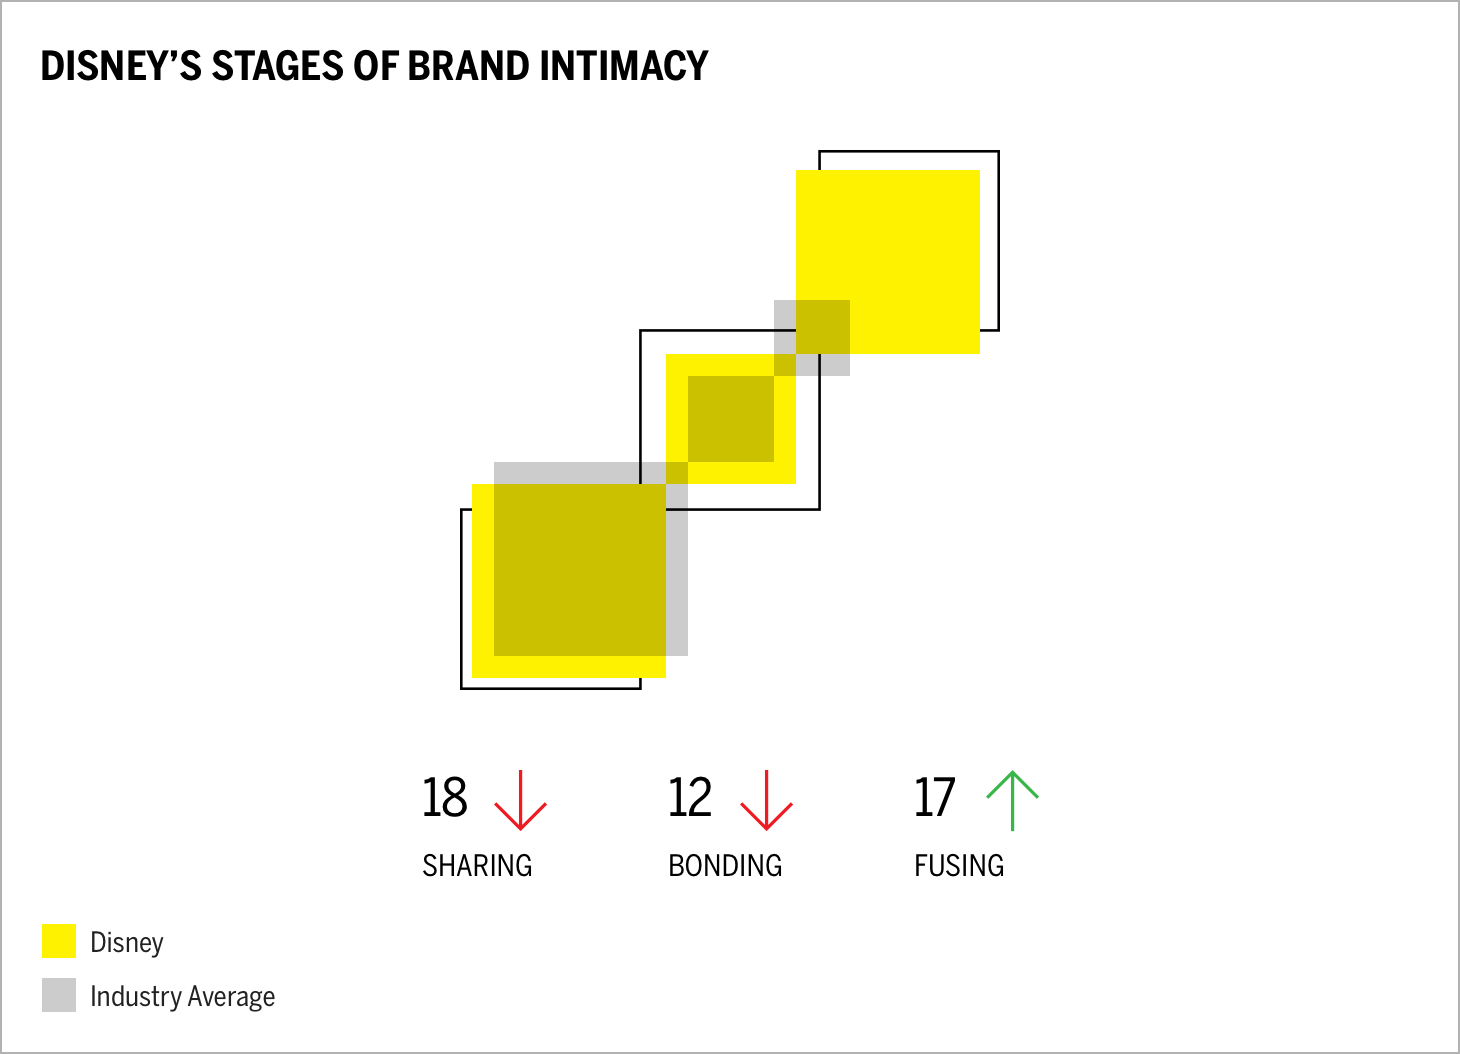 Disney's stages of brand intimacy chart